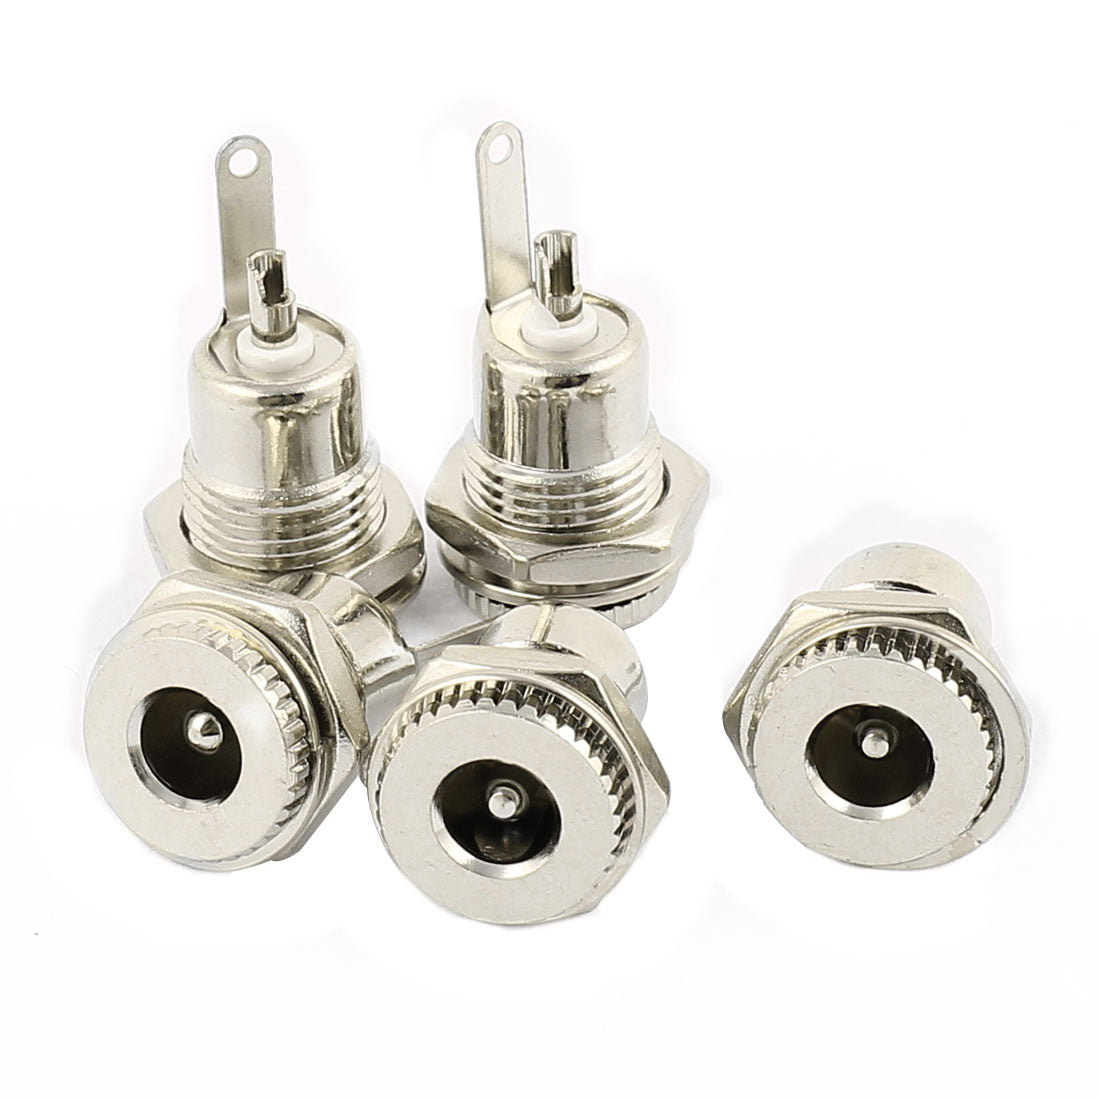 uxcell Uxcell 5pcs DC-099 Female 5.5 x 2.5mm Panel Mounting DC Power Jack Socket Connector